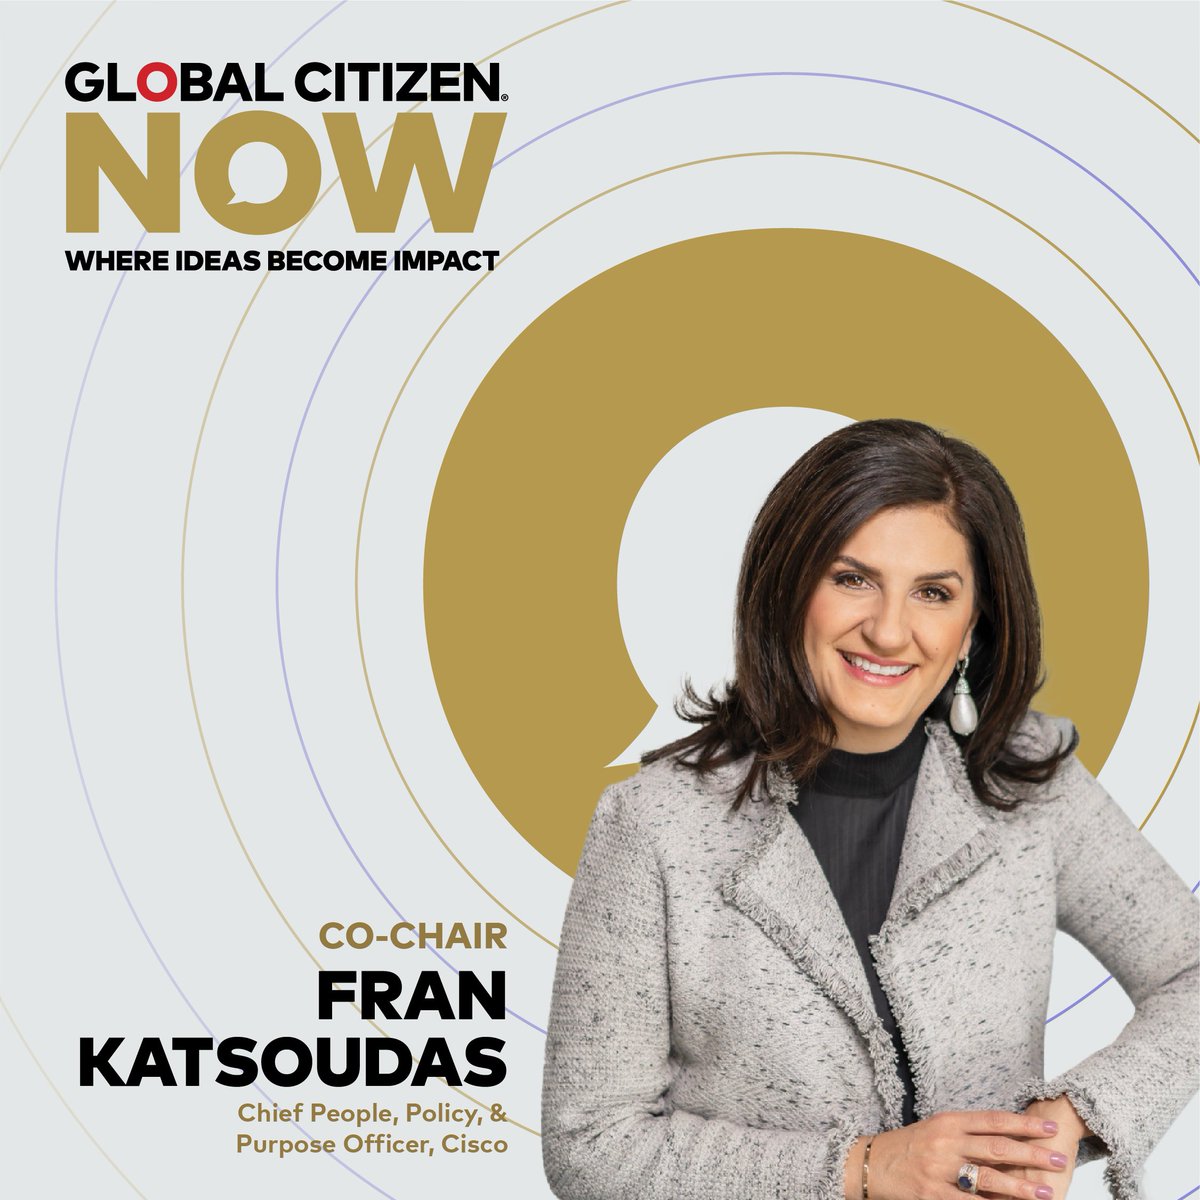 .@Cisco’s Chief People, Policy, & Purpose Officer @FranKatsoudas is joining us for the second year in a row for #GlobalCitizenNOW.